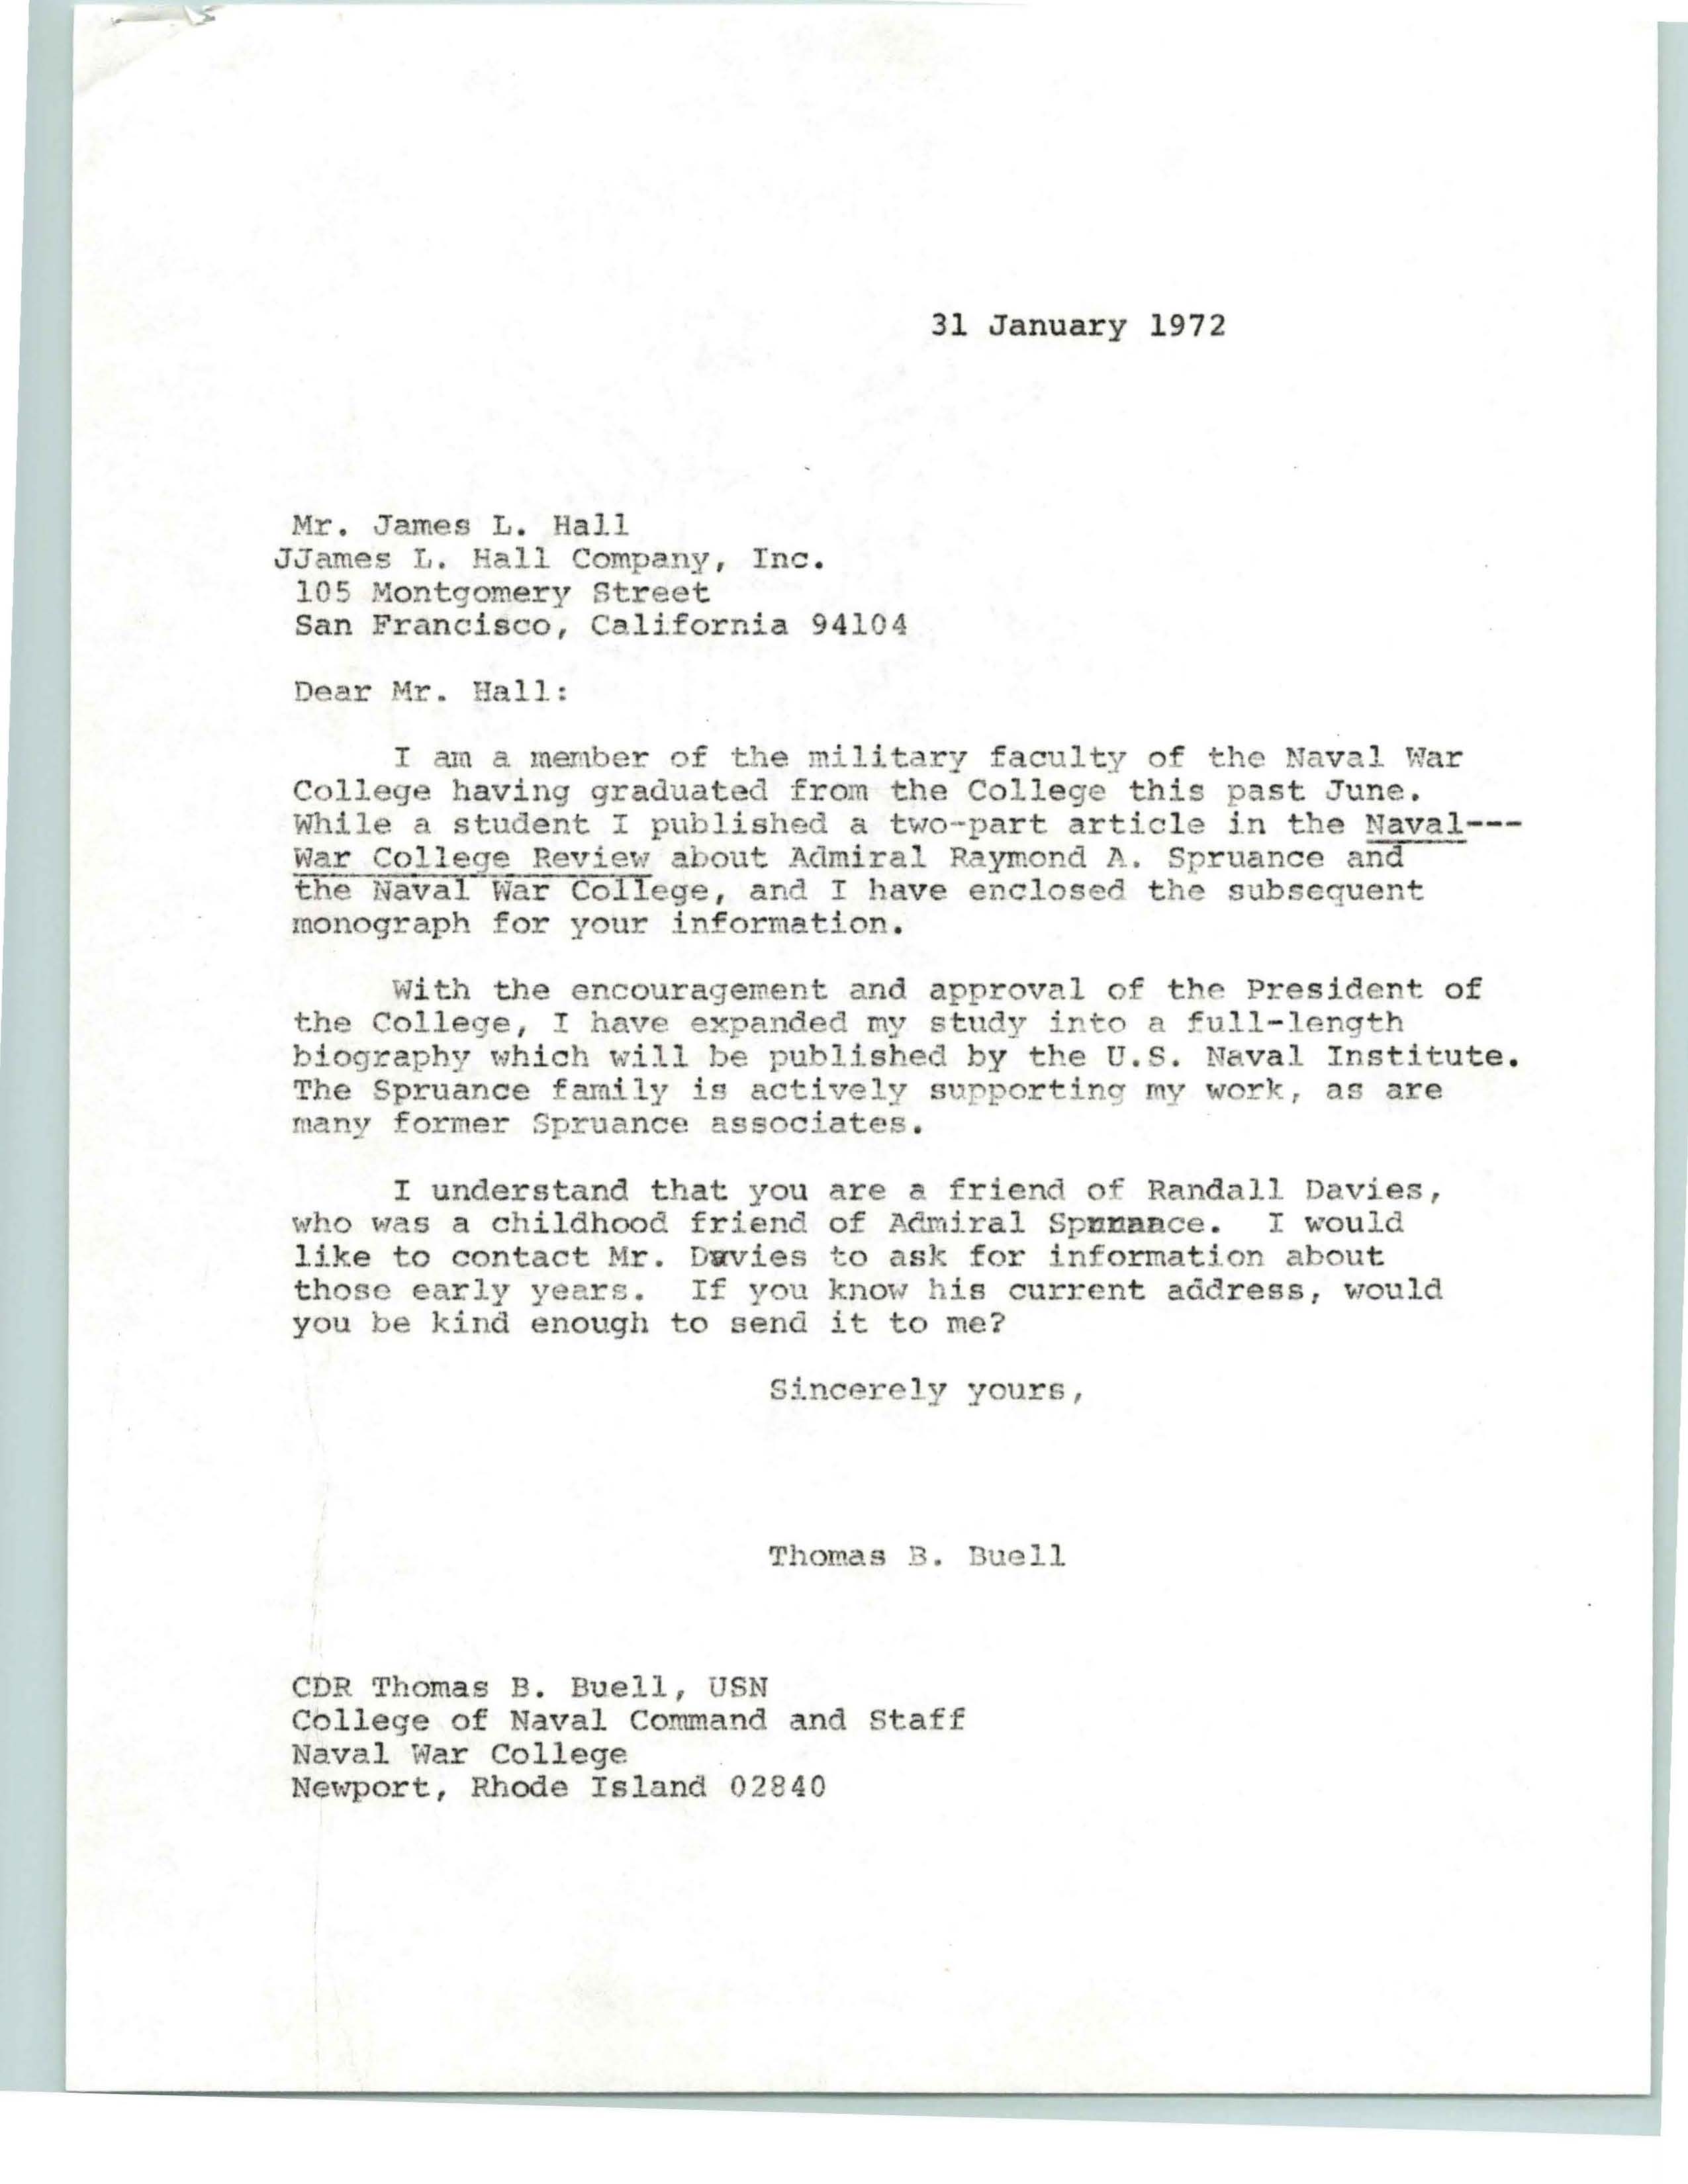 Correspondence between CDR Buell and James L. Hall